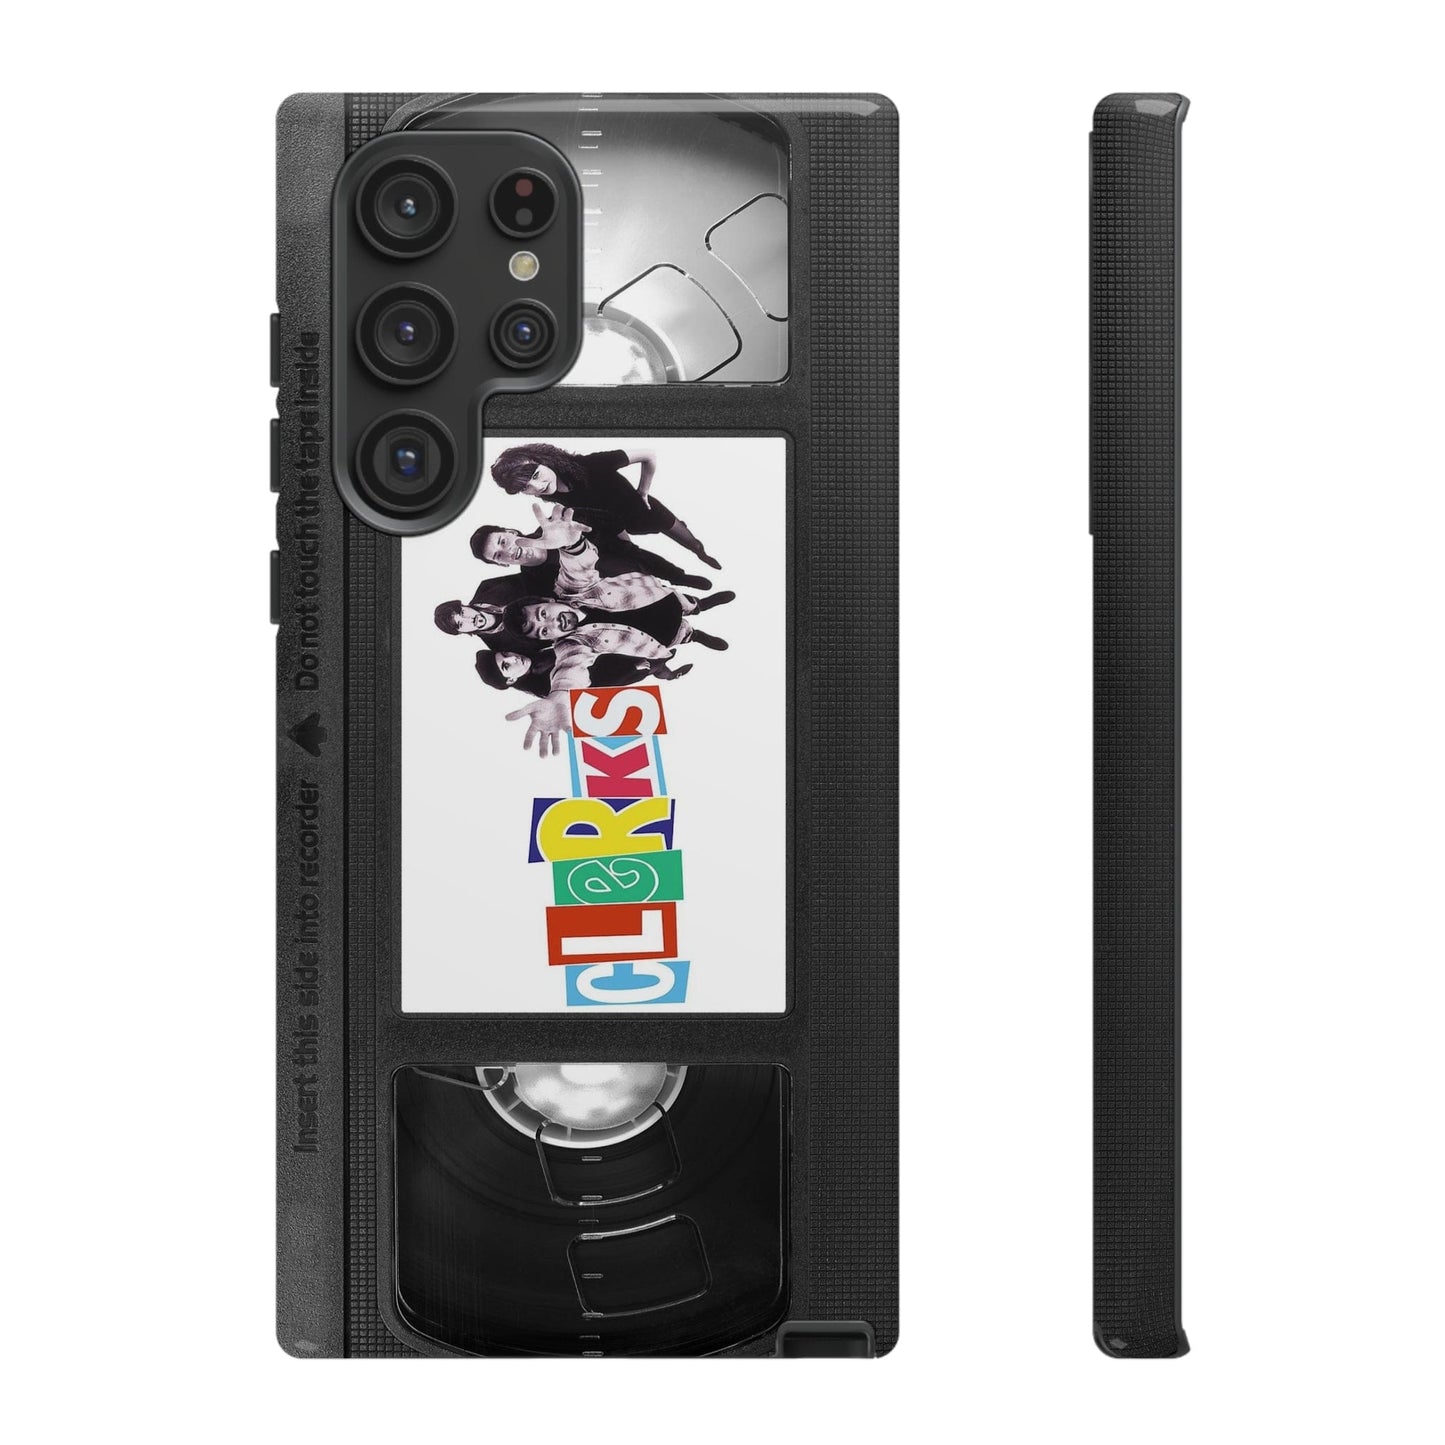 Clerks Impact Resistant VHS Phone Cases